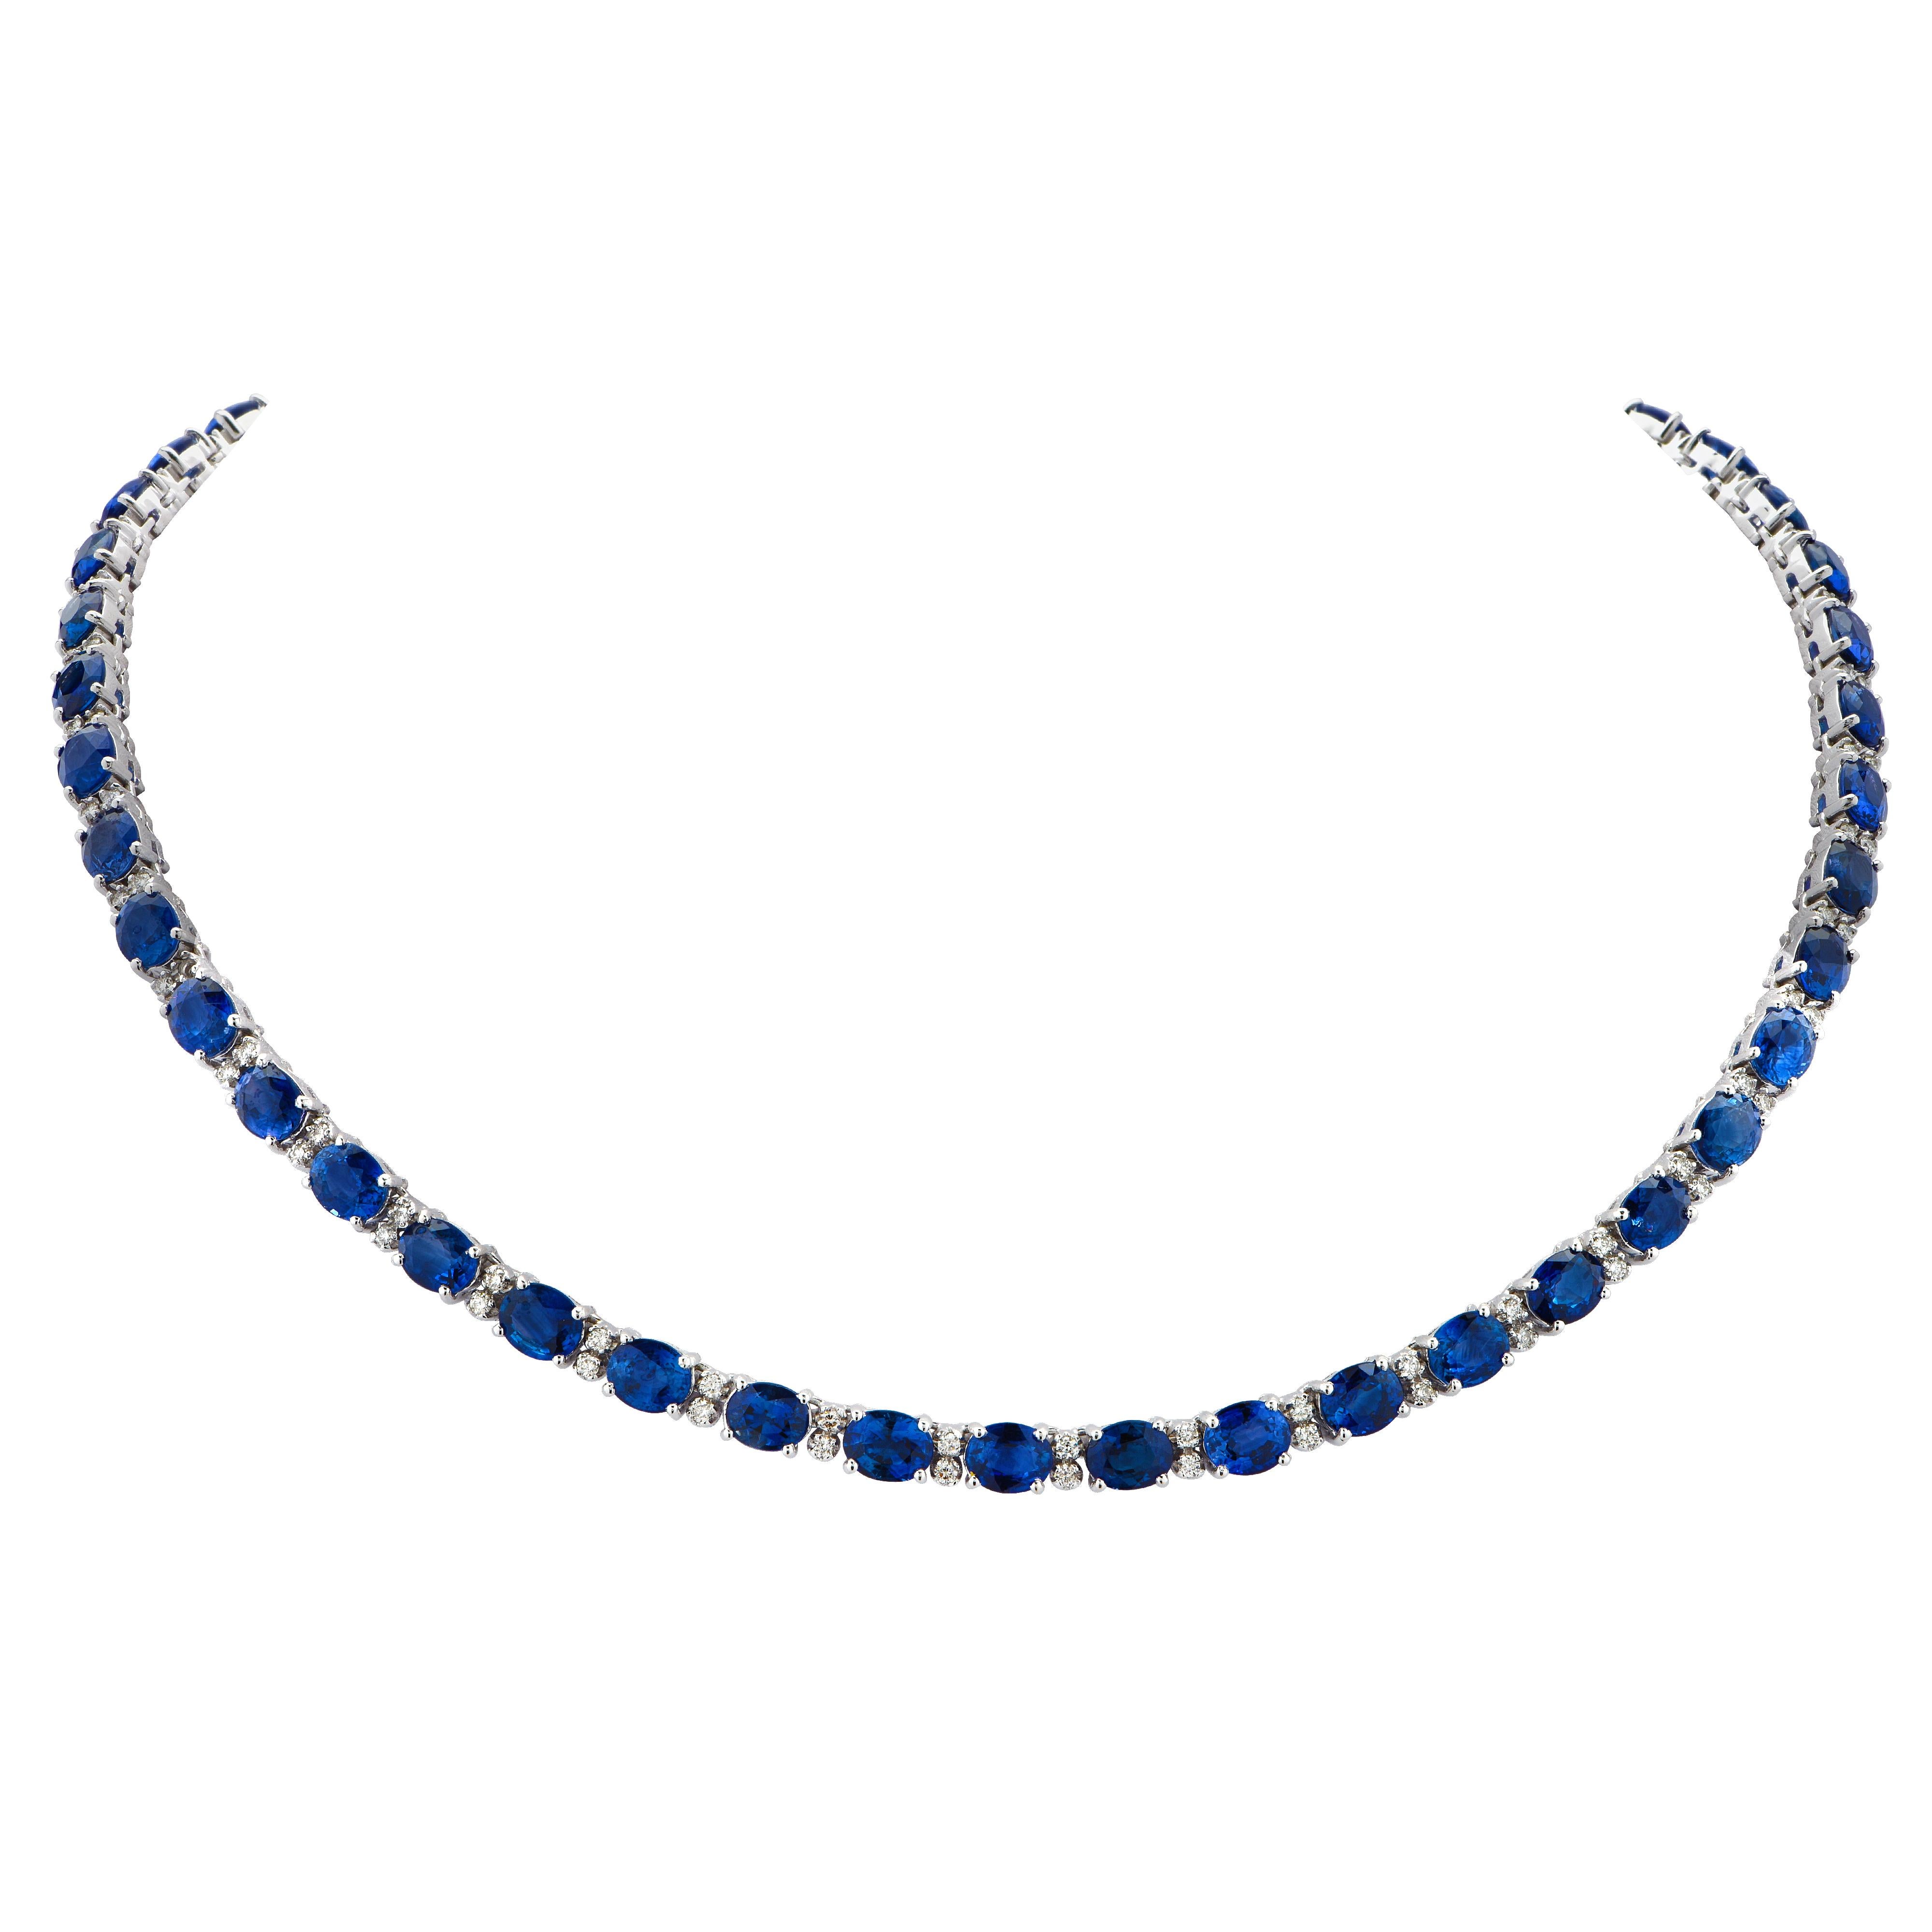 Stunning Sapphire and Diamond necklace crafted in 18 Karat white gold, showcasing 49 vibrant blue oval sapphires weighing approximately 40 carats total, accented by 98 round brilliant cut diamonds weighing approximately 2 carats total, G color,